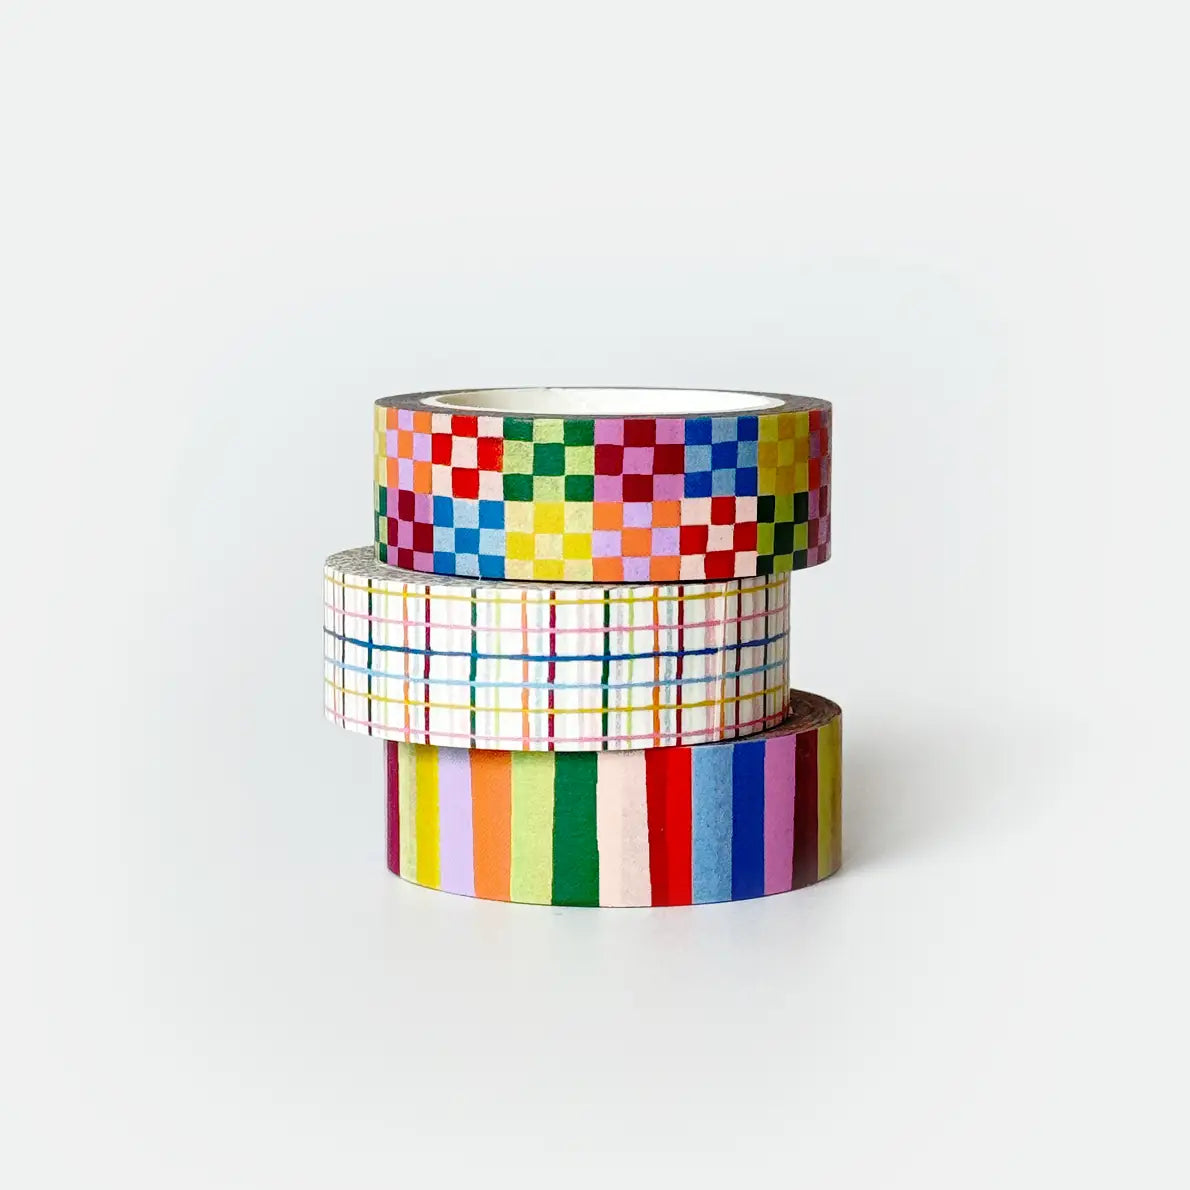 Washi Tape - Set of 3 (4 collections)